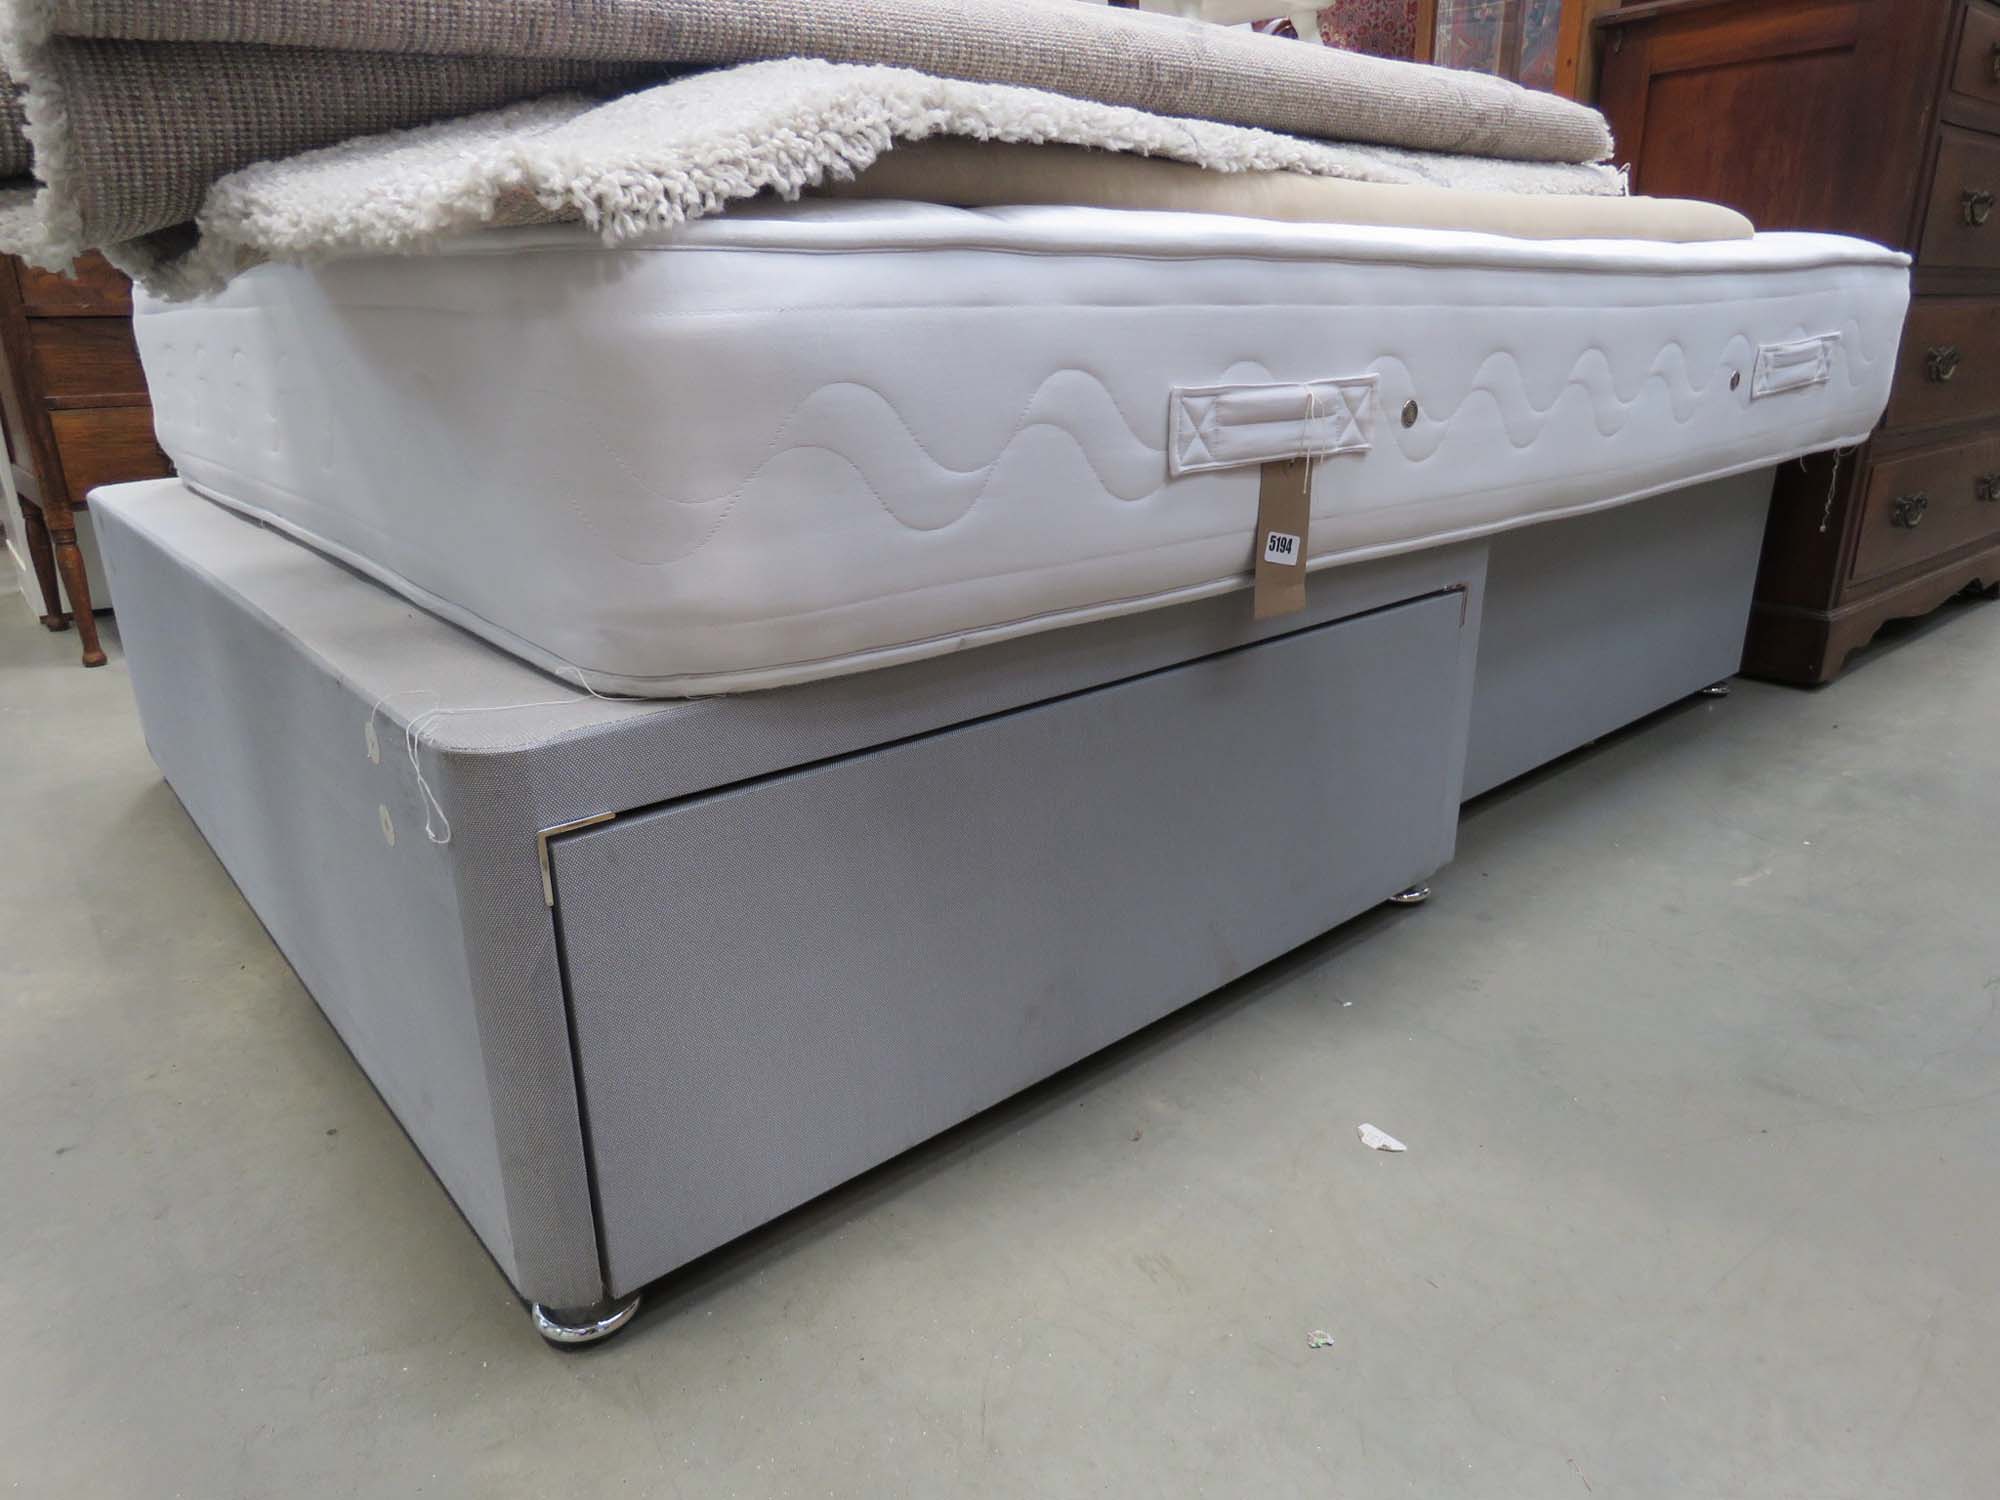 4 foot 6 divan bed base with mattress and headboard